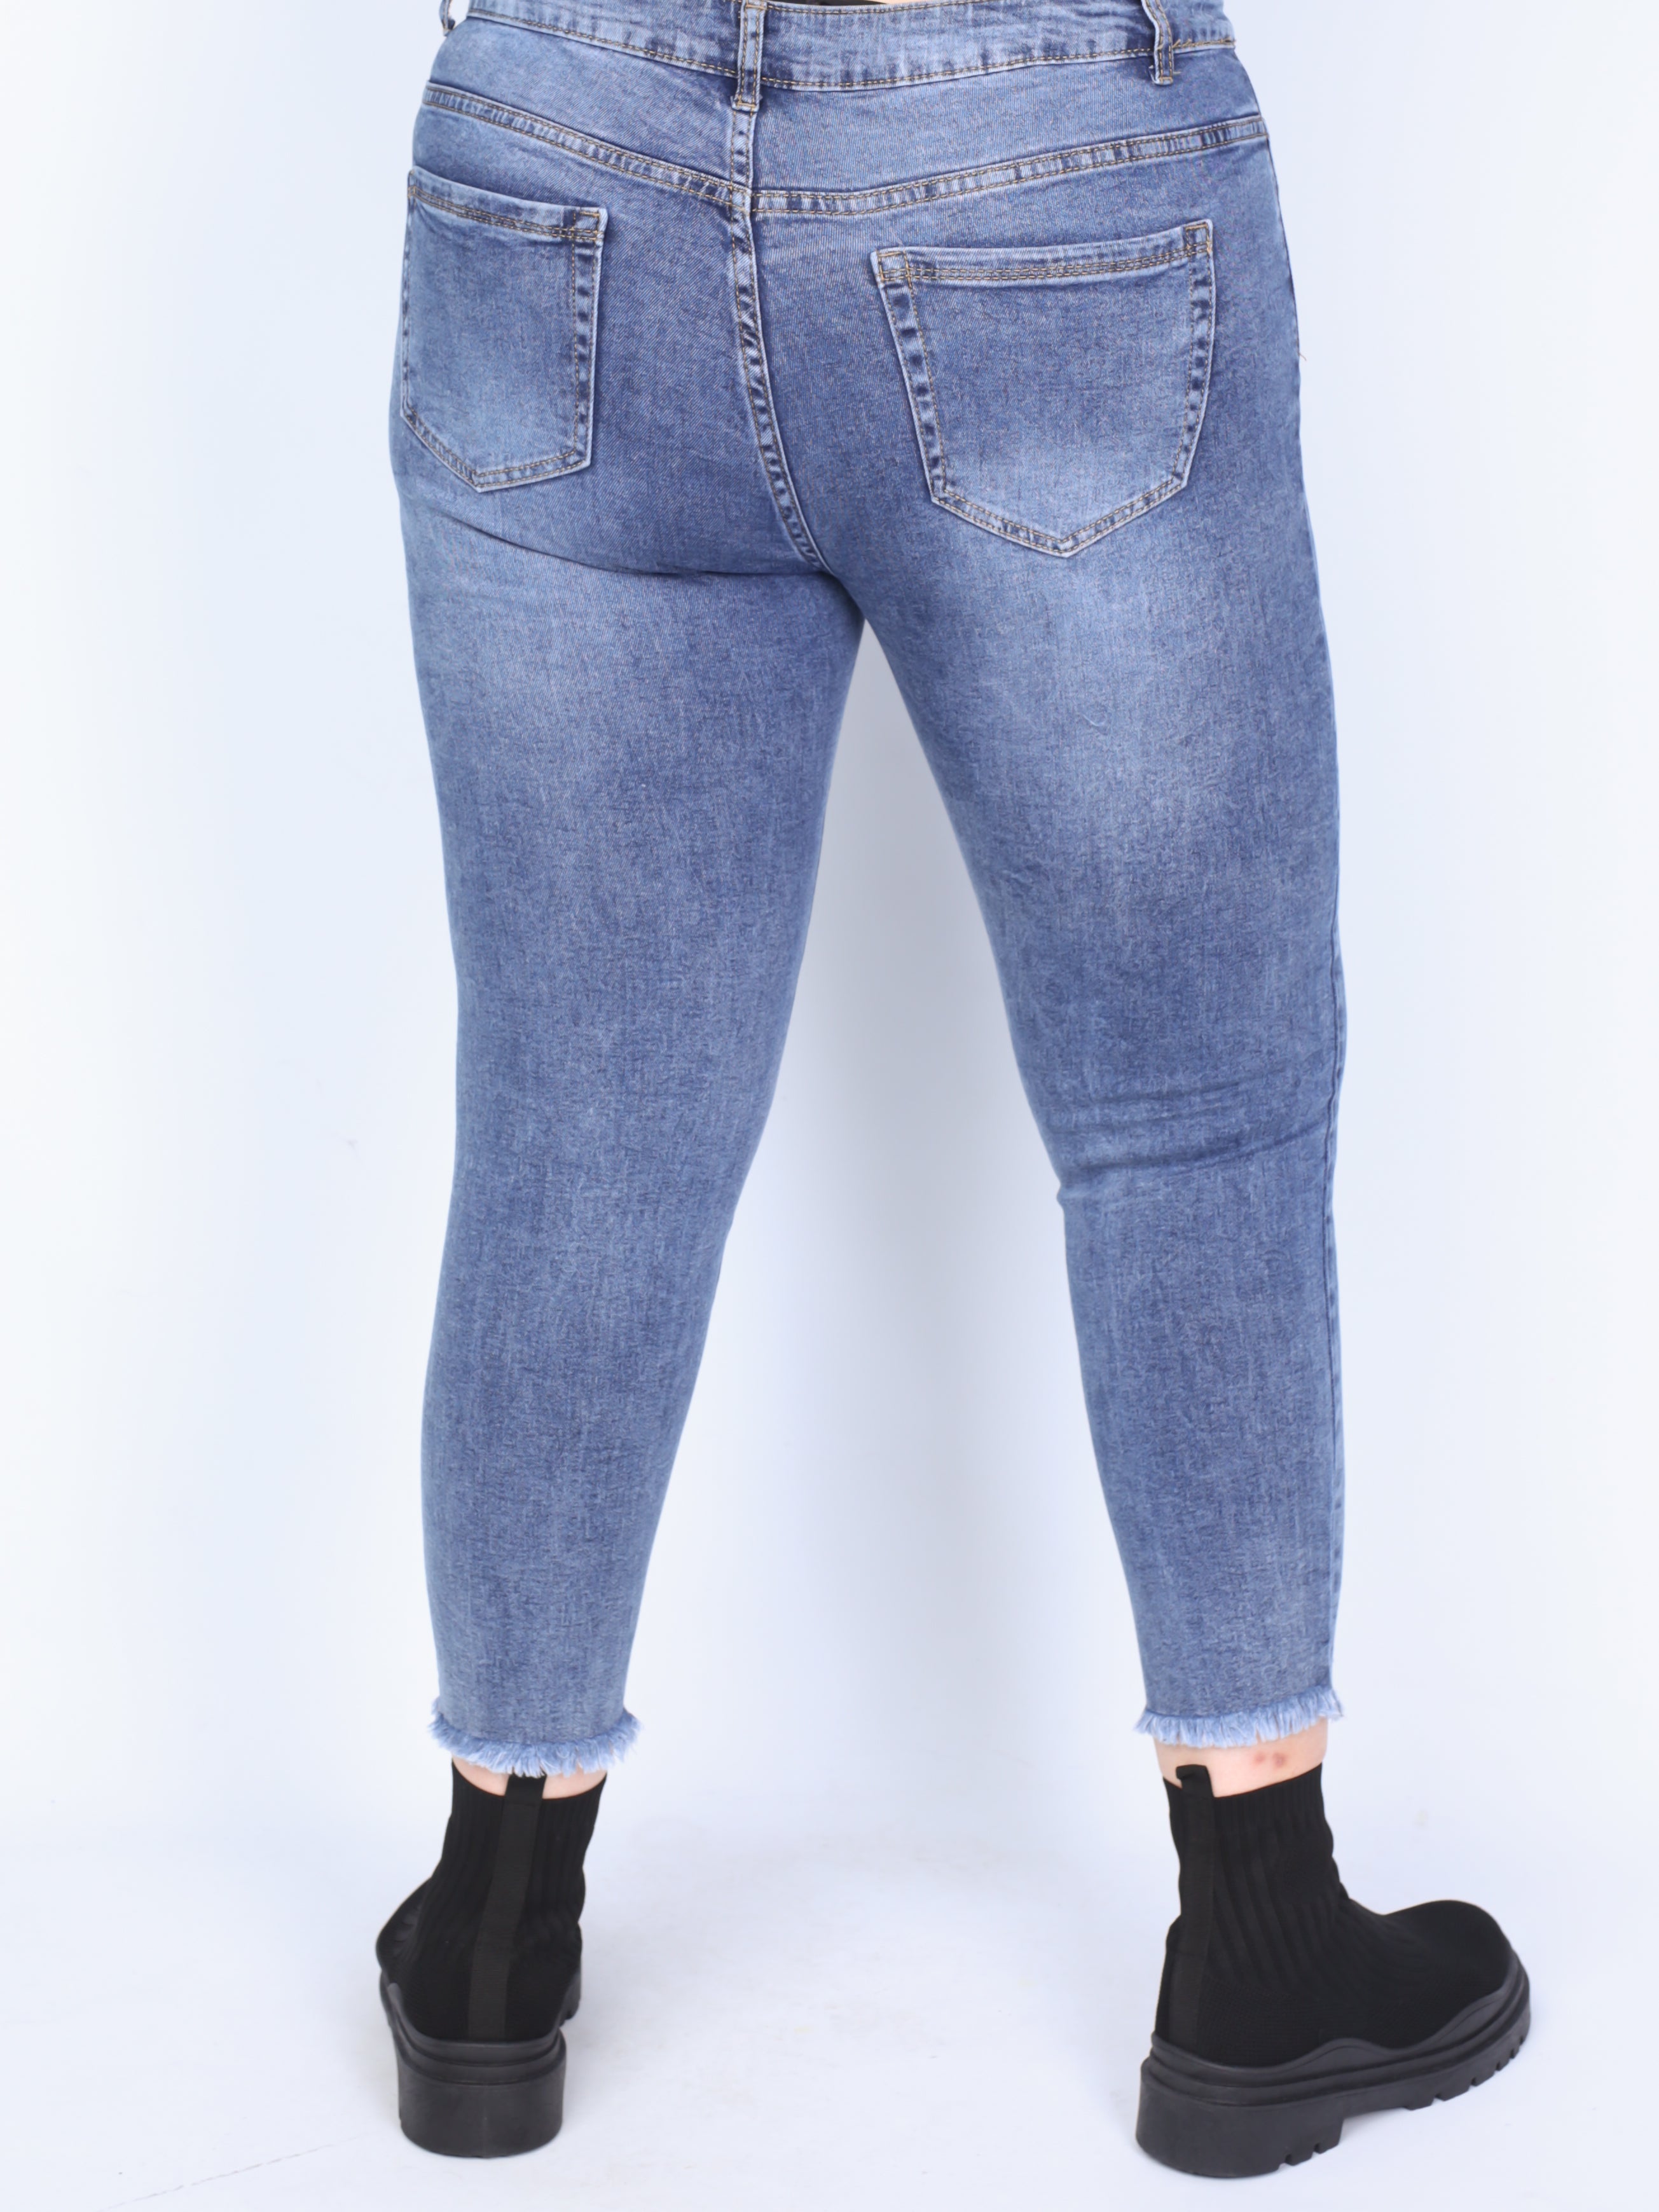 Plus size jeans with holes and wear